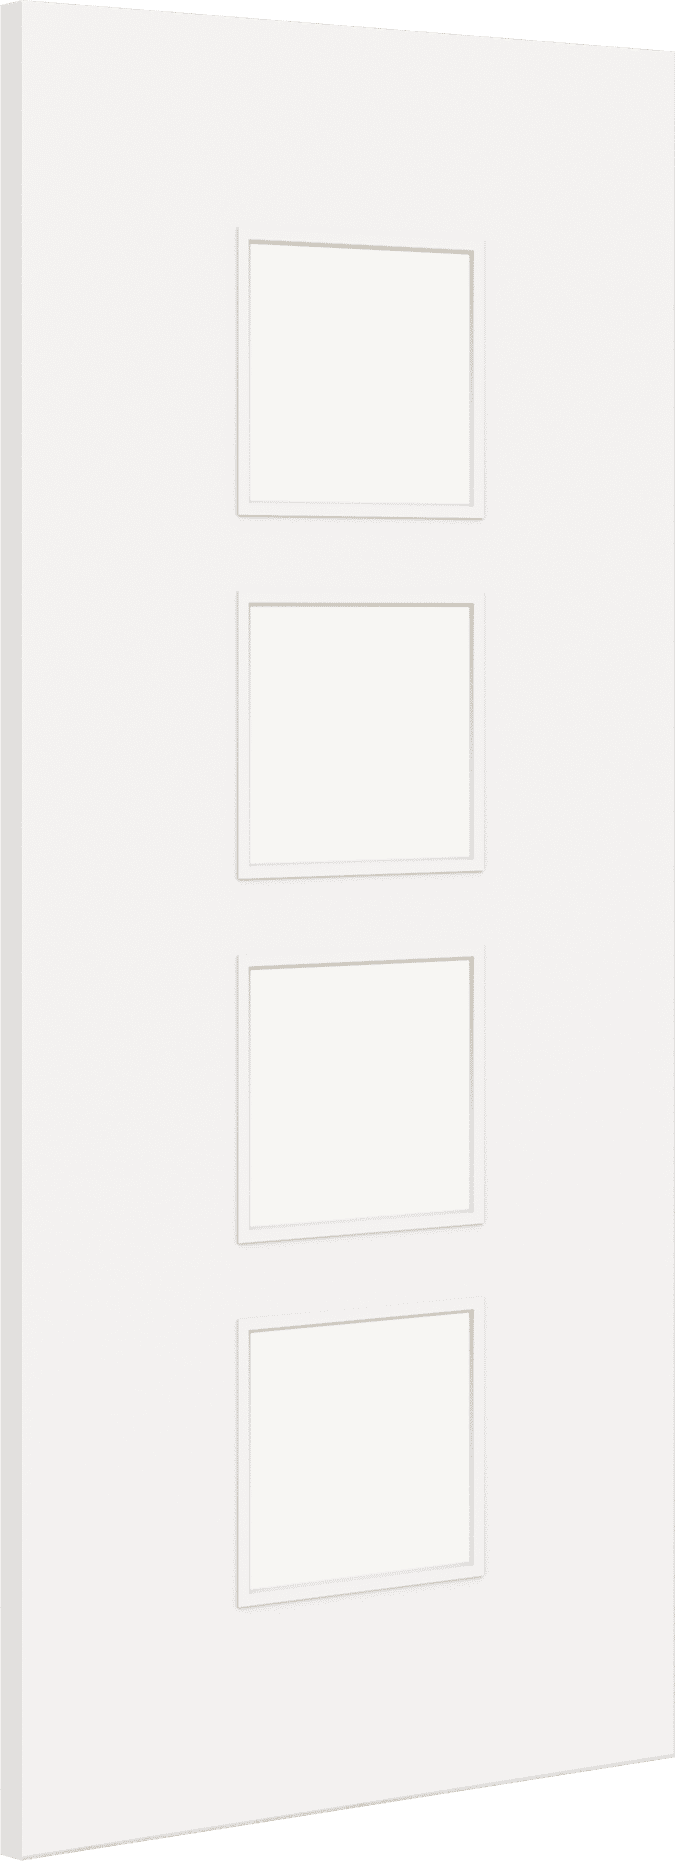 1981mm x 686mm x 44mm (27") Architectural Paint Grade White 09 Clear Glazed Fire Door Blank